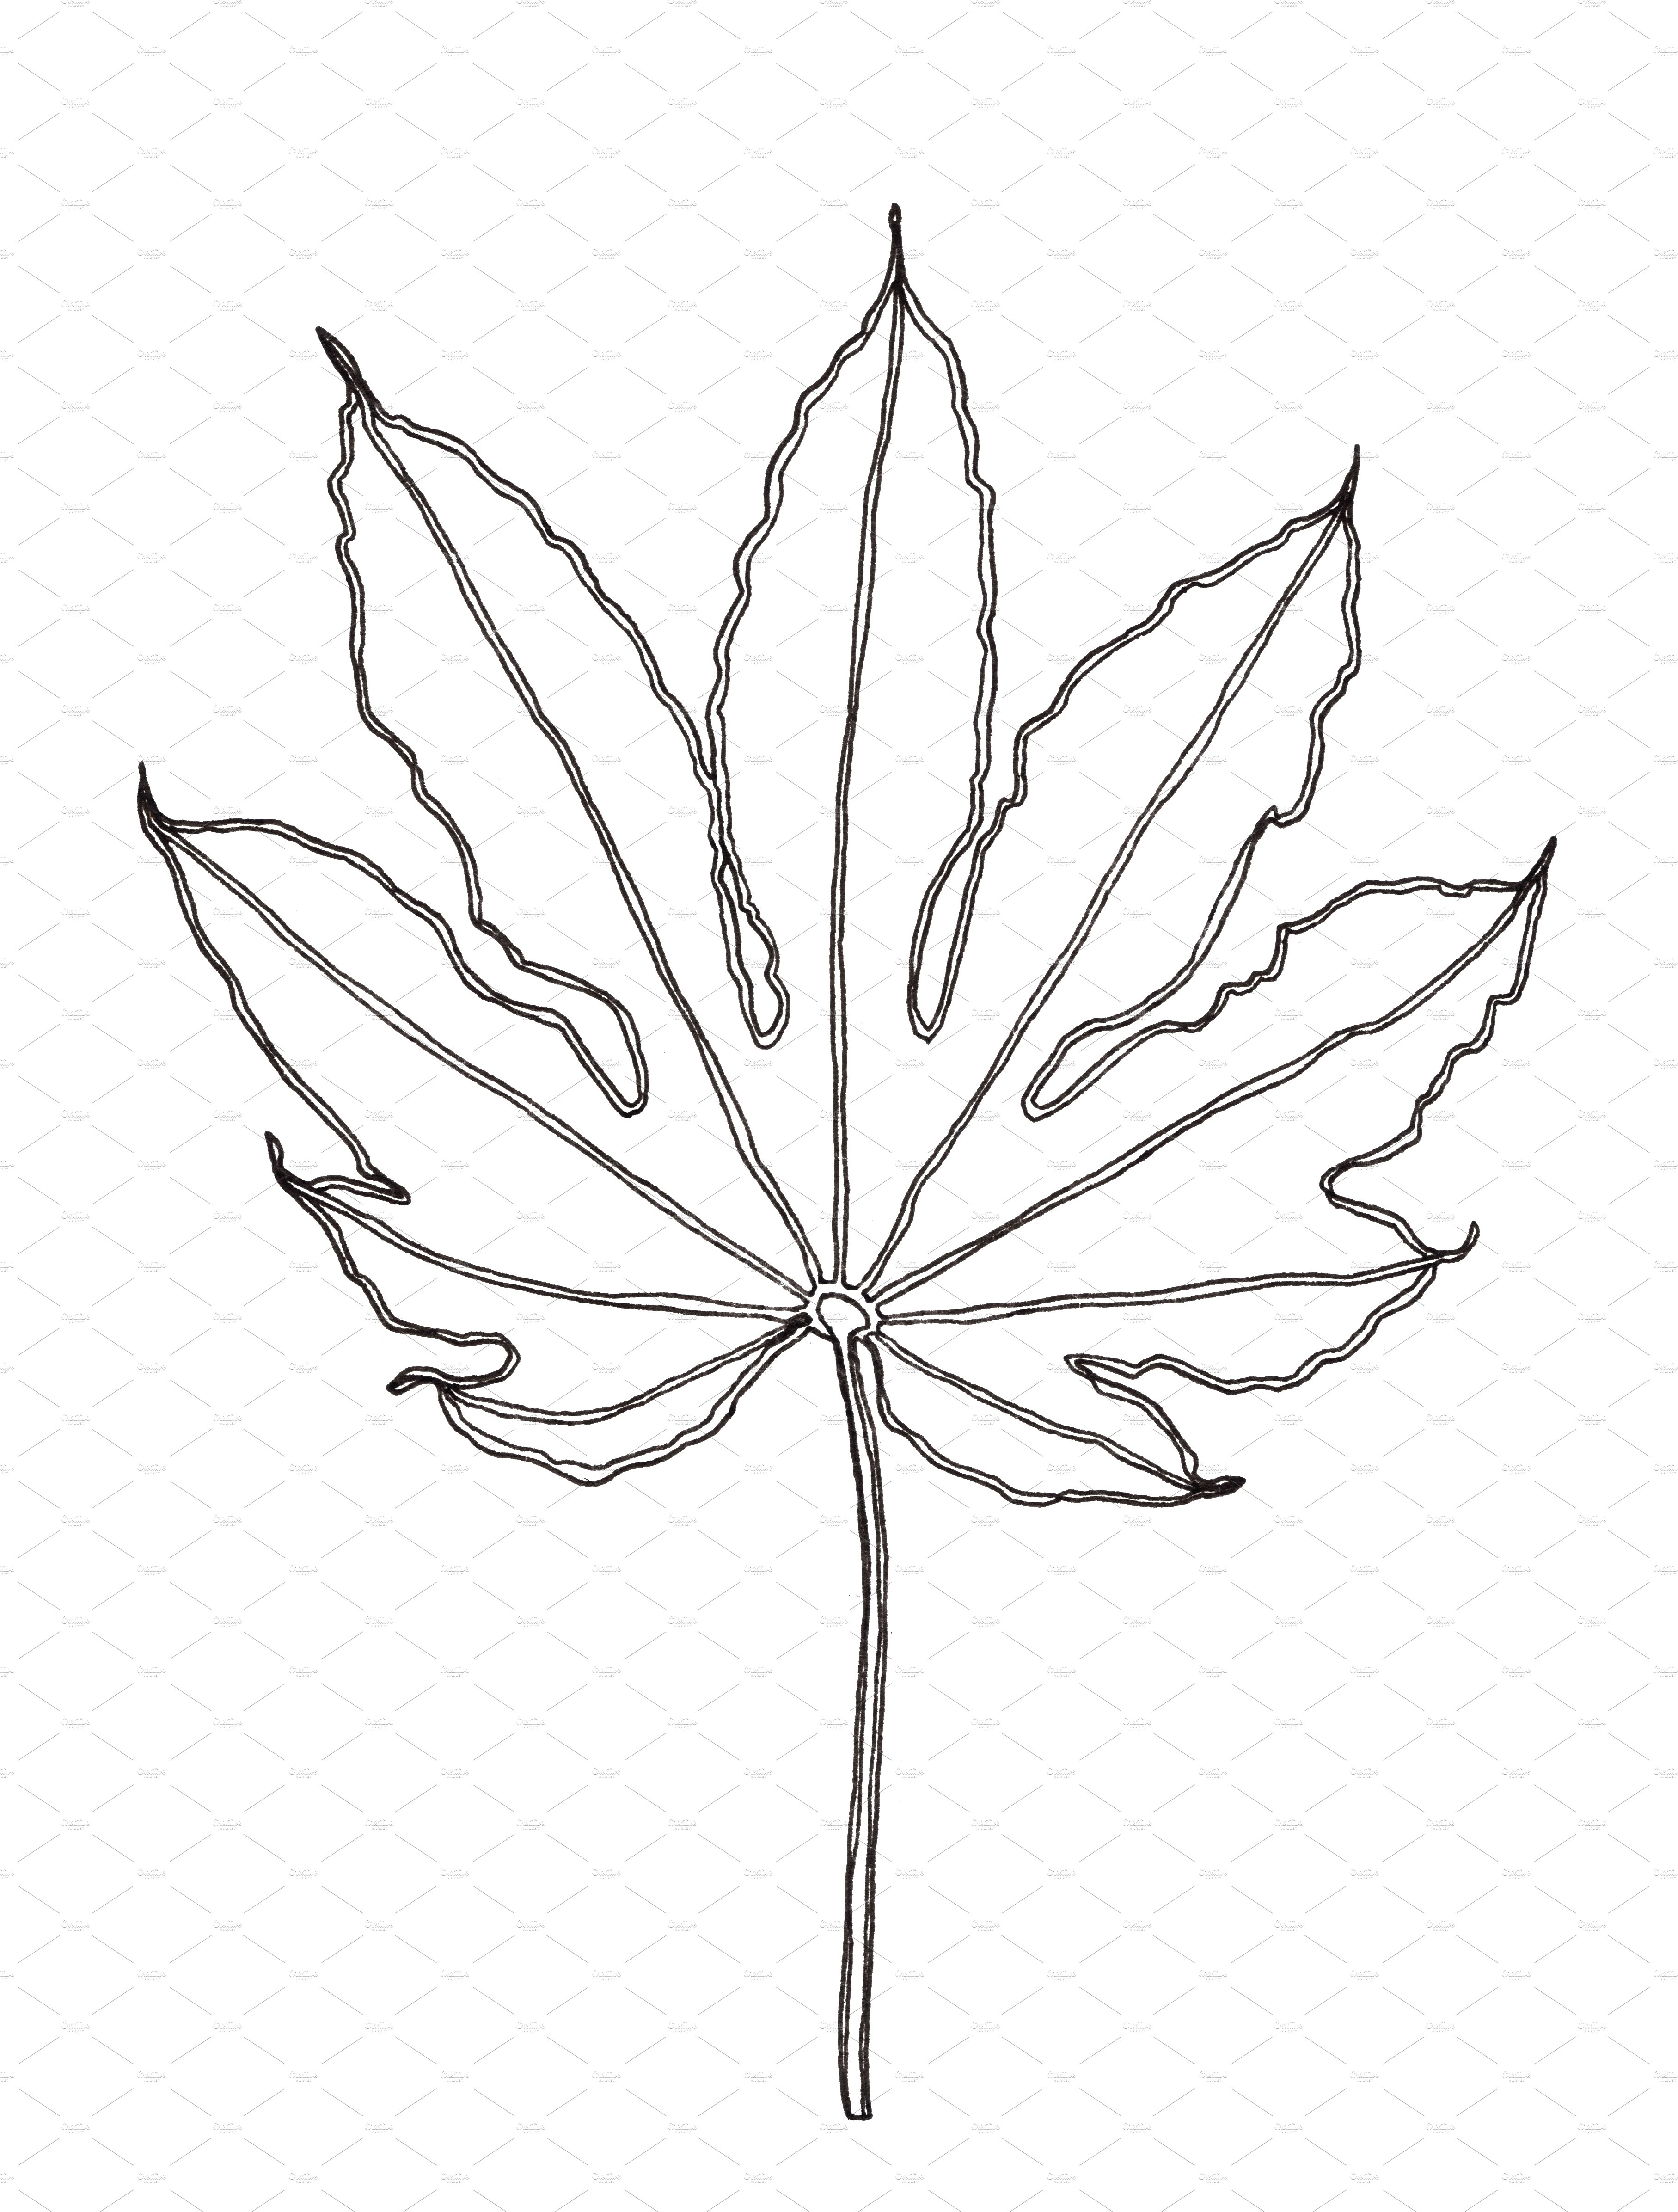 Black and white drawing of a leaf.